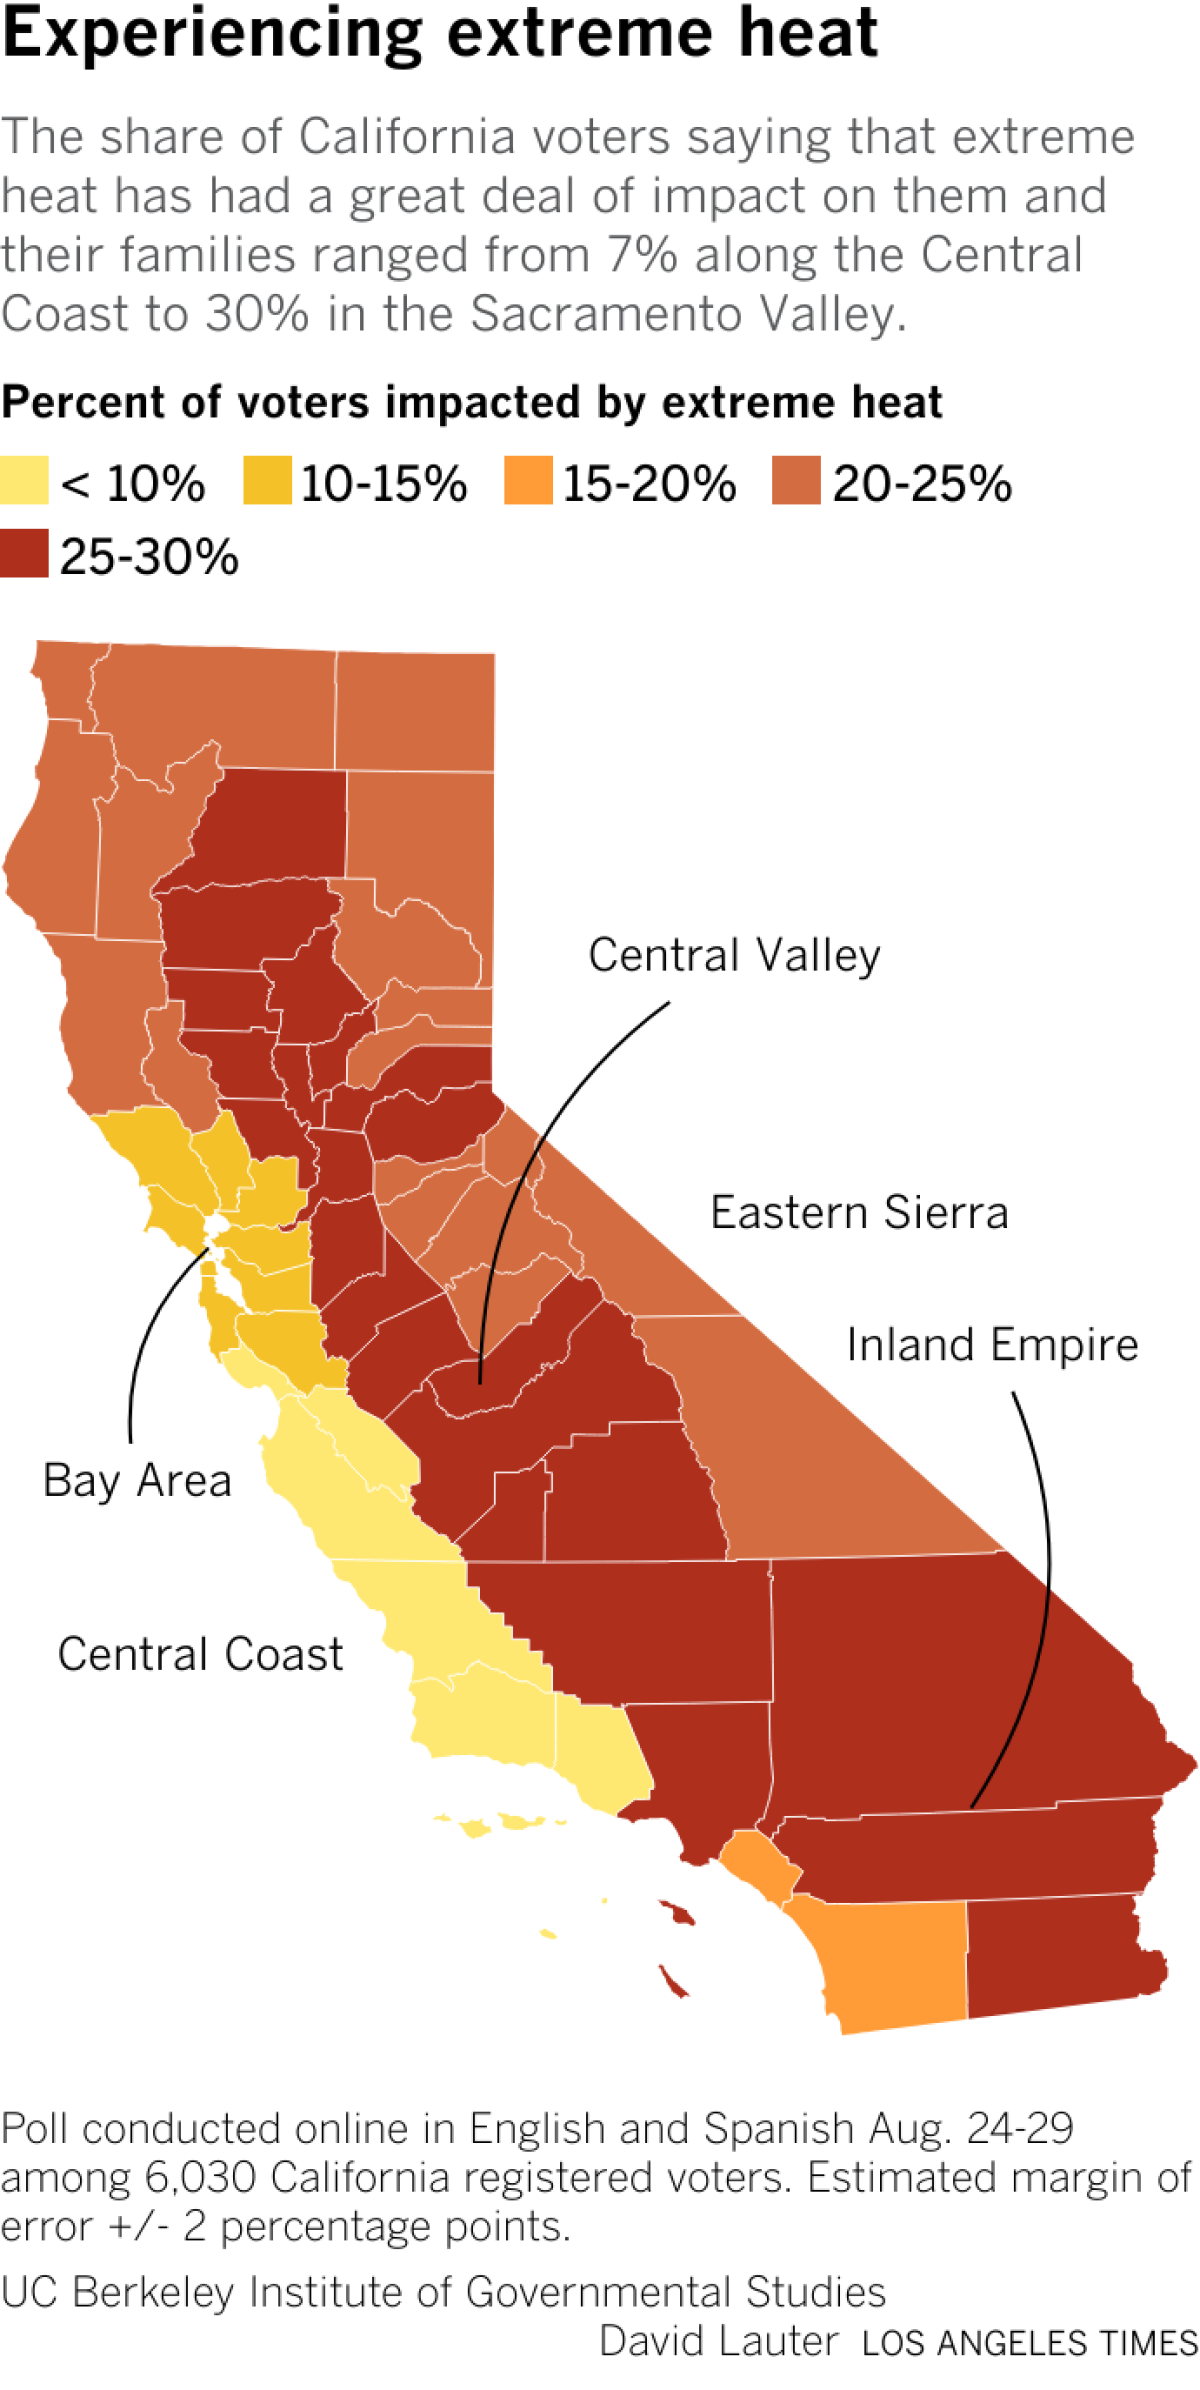 The share of California voters saying that extreme heat has had a great deal of impact on them and their families ranged from 7% along the Central Coast to 30% in the Sacramento Valley.